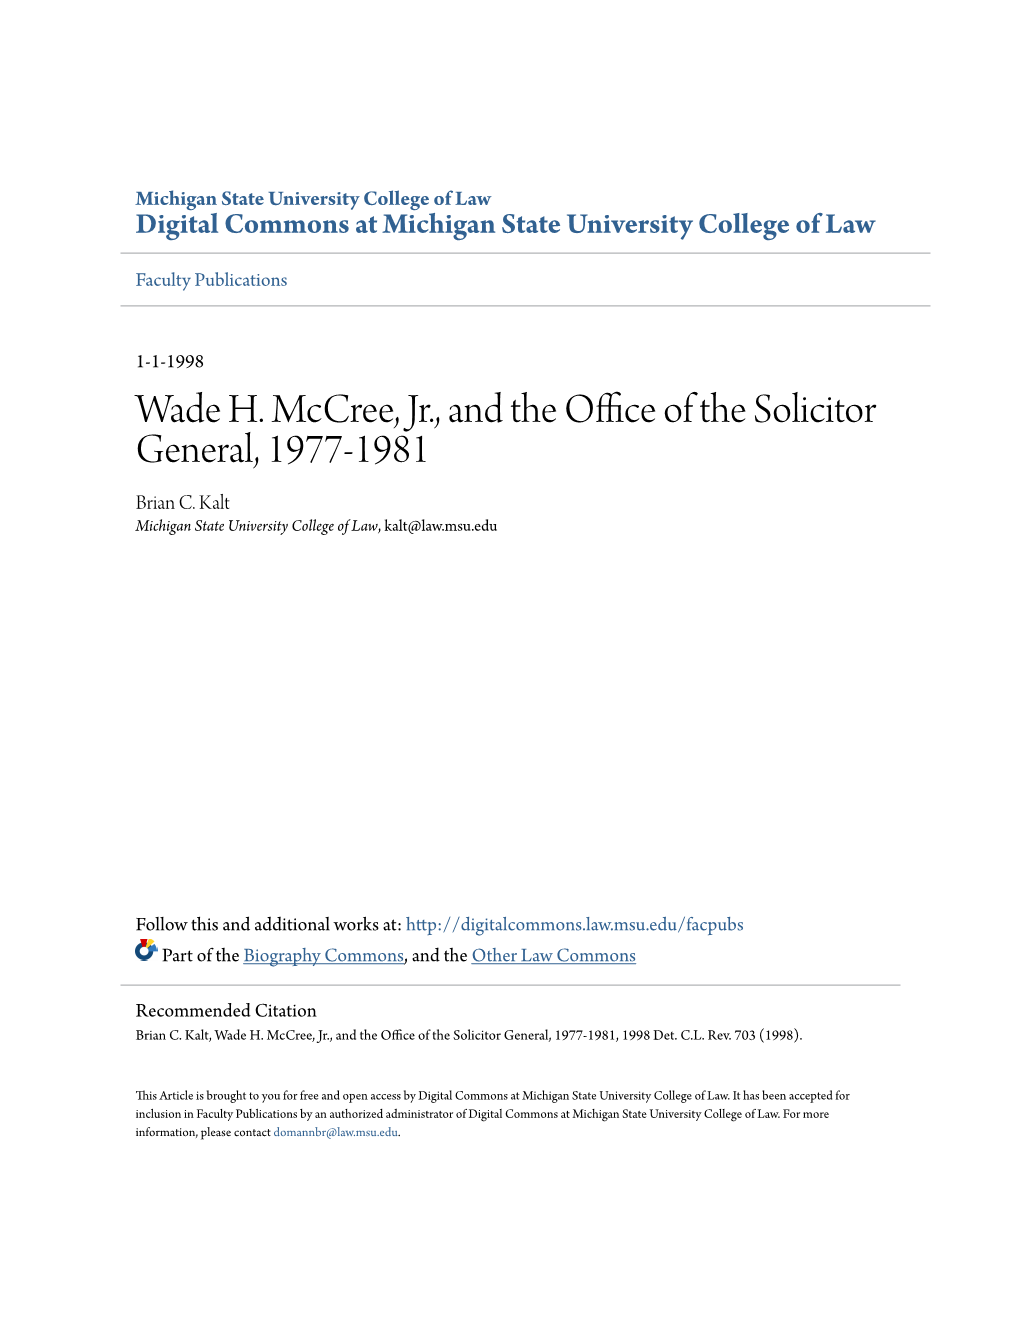 Wade H. Mccree, Jr., and the Office of the Solicitor General, 1977-1981, 1998 Det